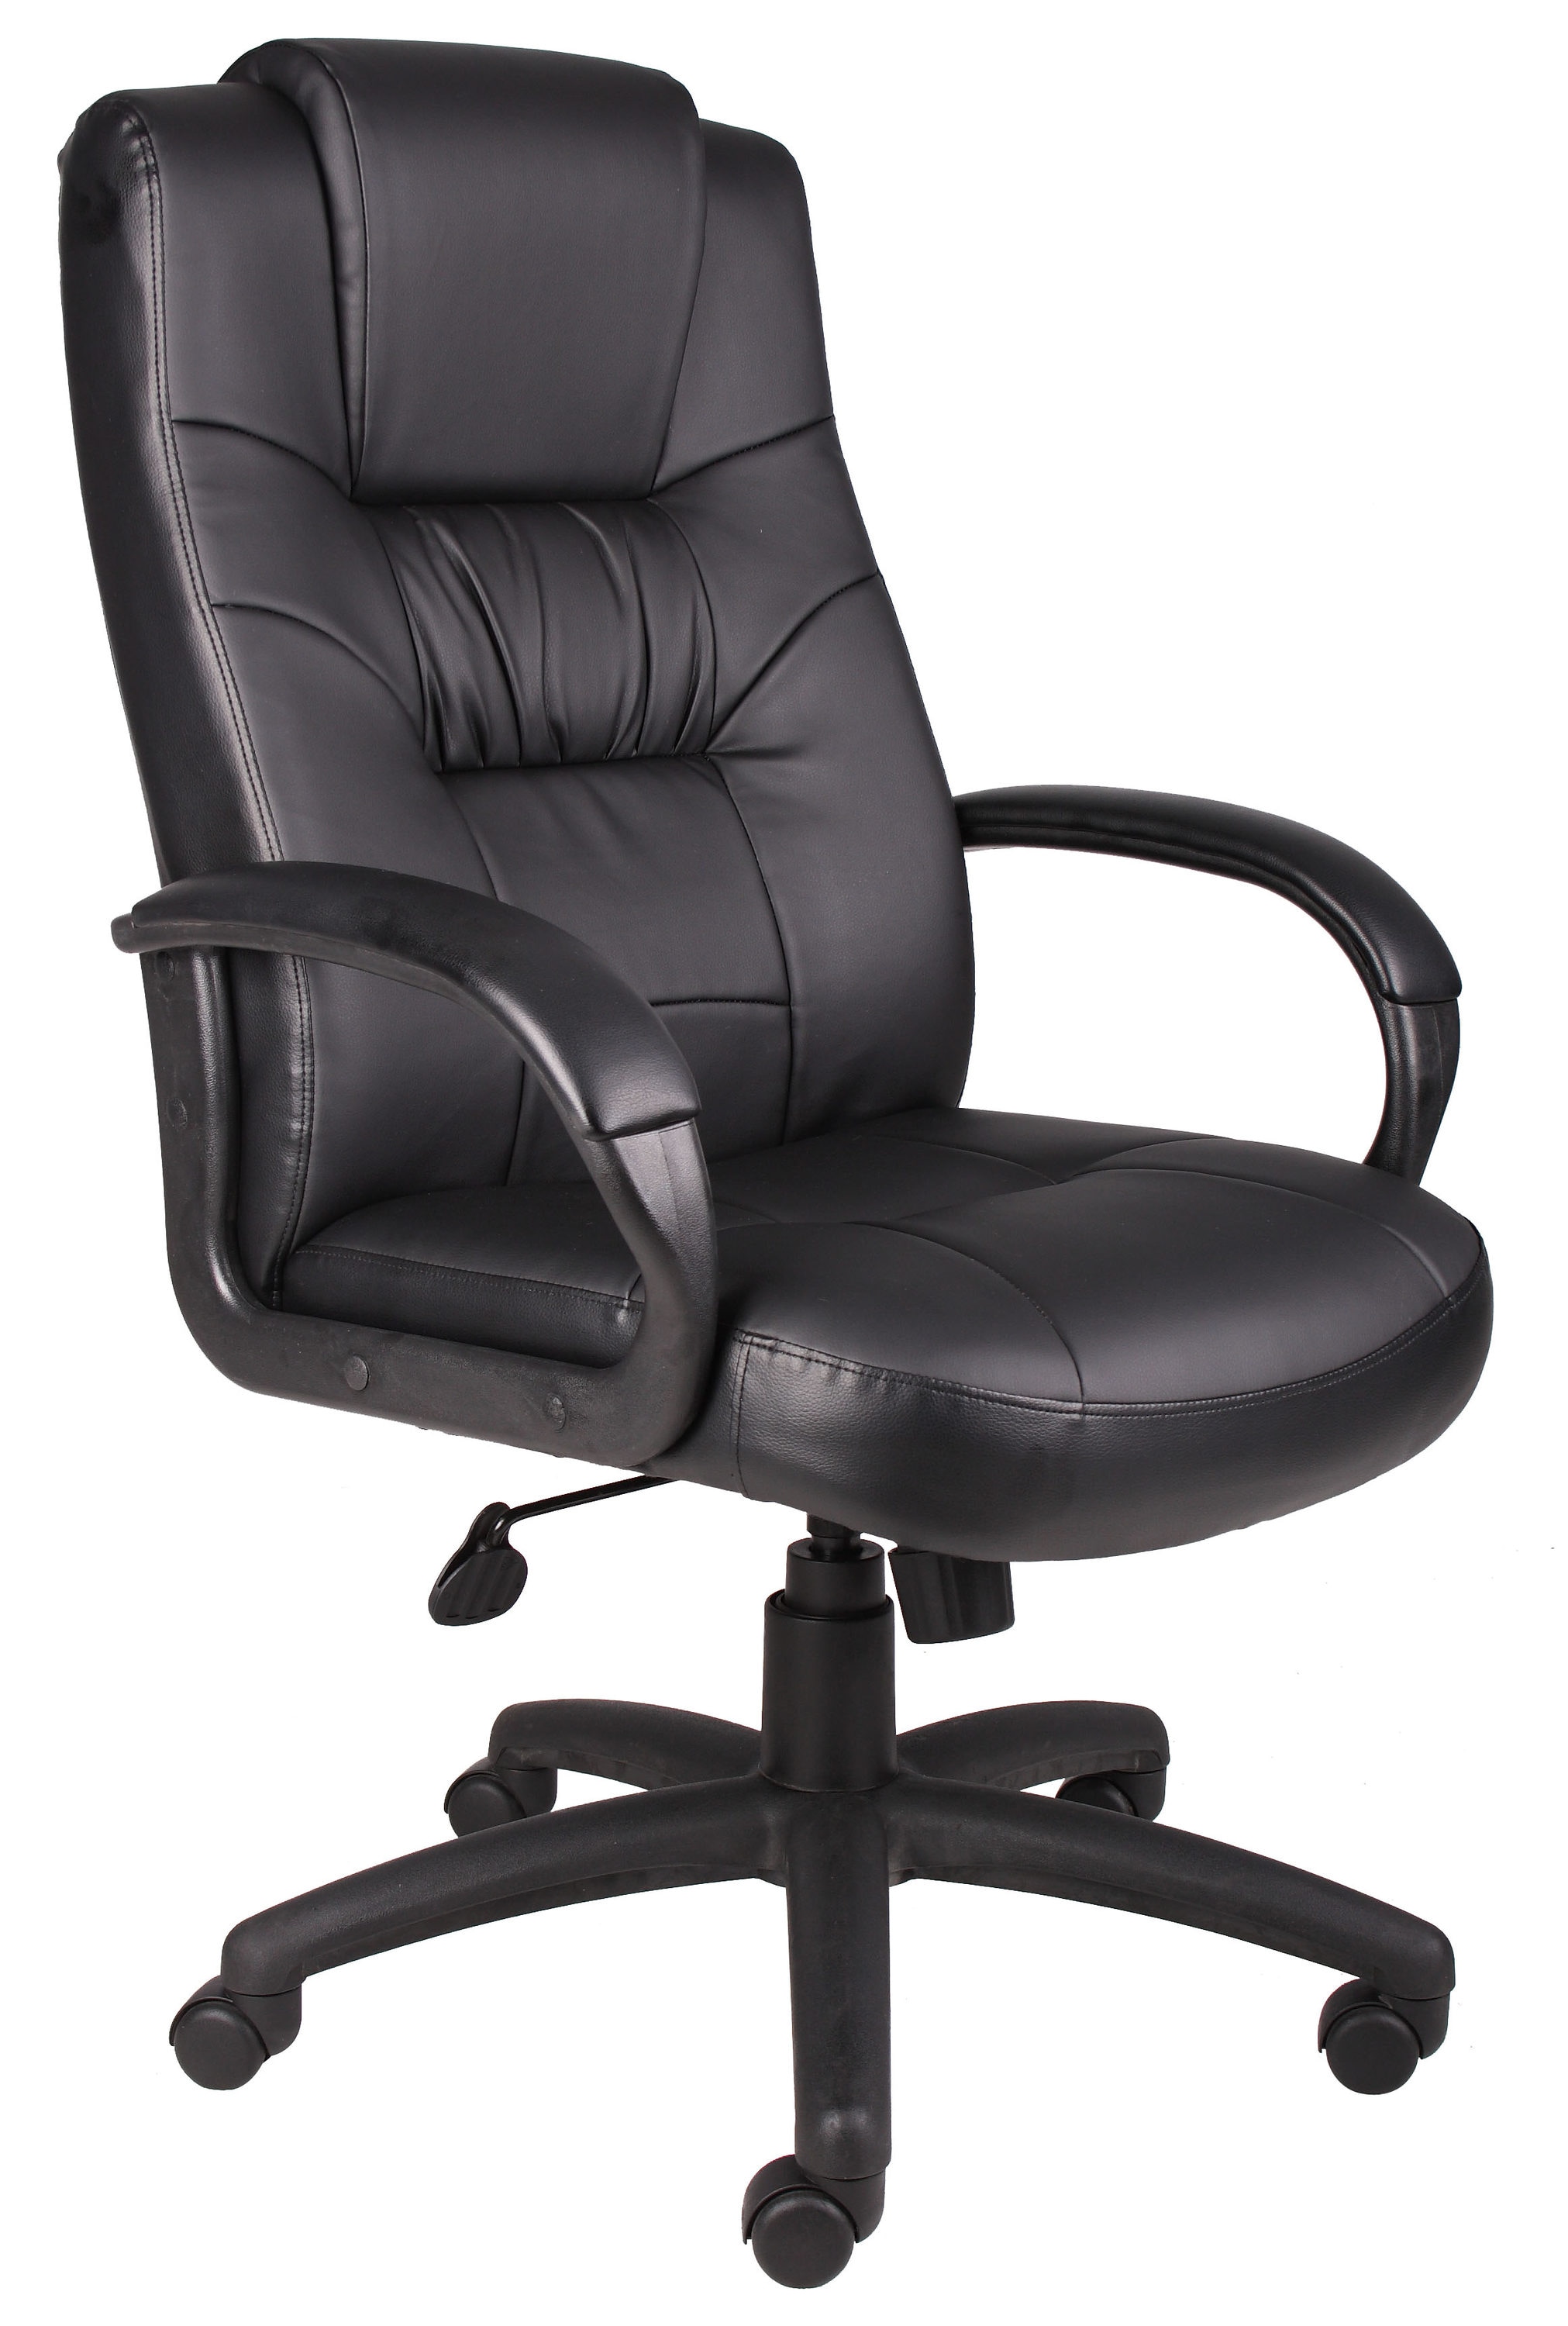 Office Chair Executive Chair High Back Visitors Chair Gas Lift Swivel Game Chair 